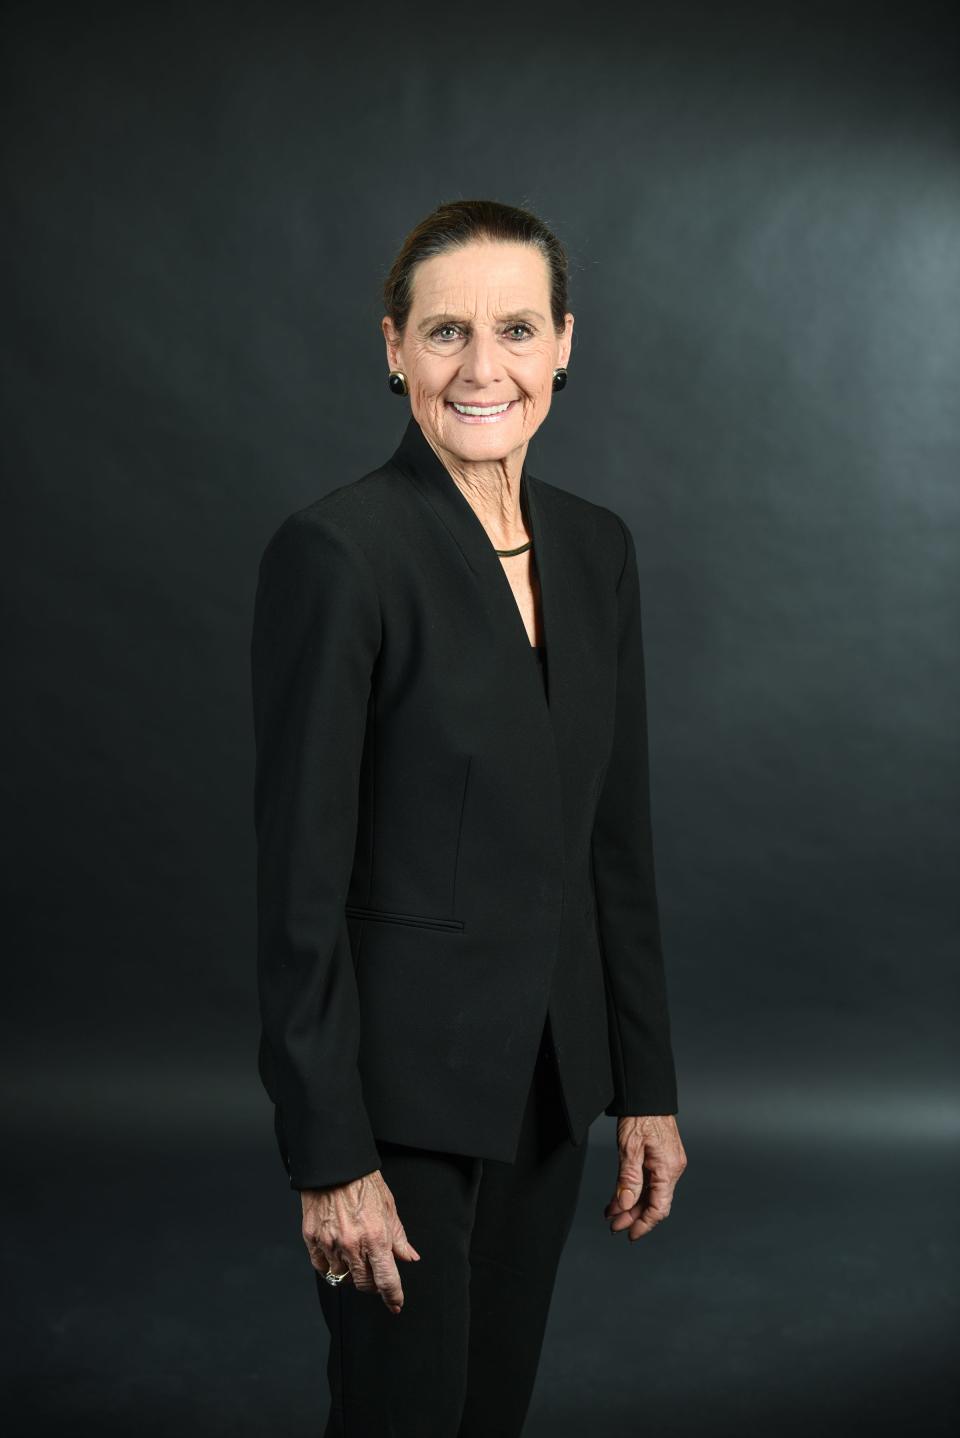 Ohio State Representative in the 65th District, Jean Schmidt poses for a portrait at The Enquirer's studio on Wednesday April 20, 2022.